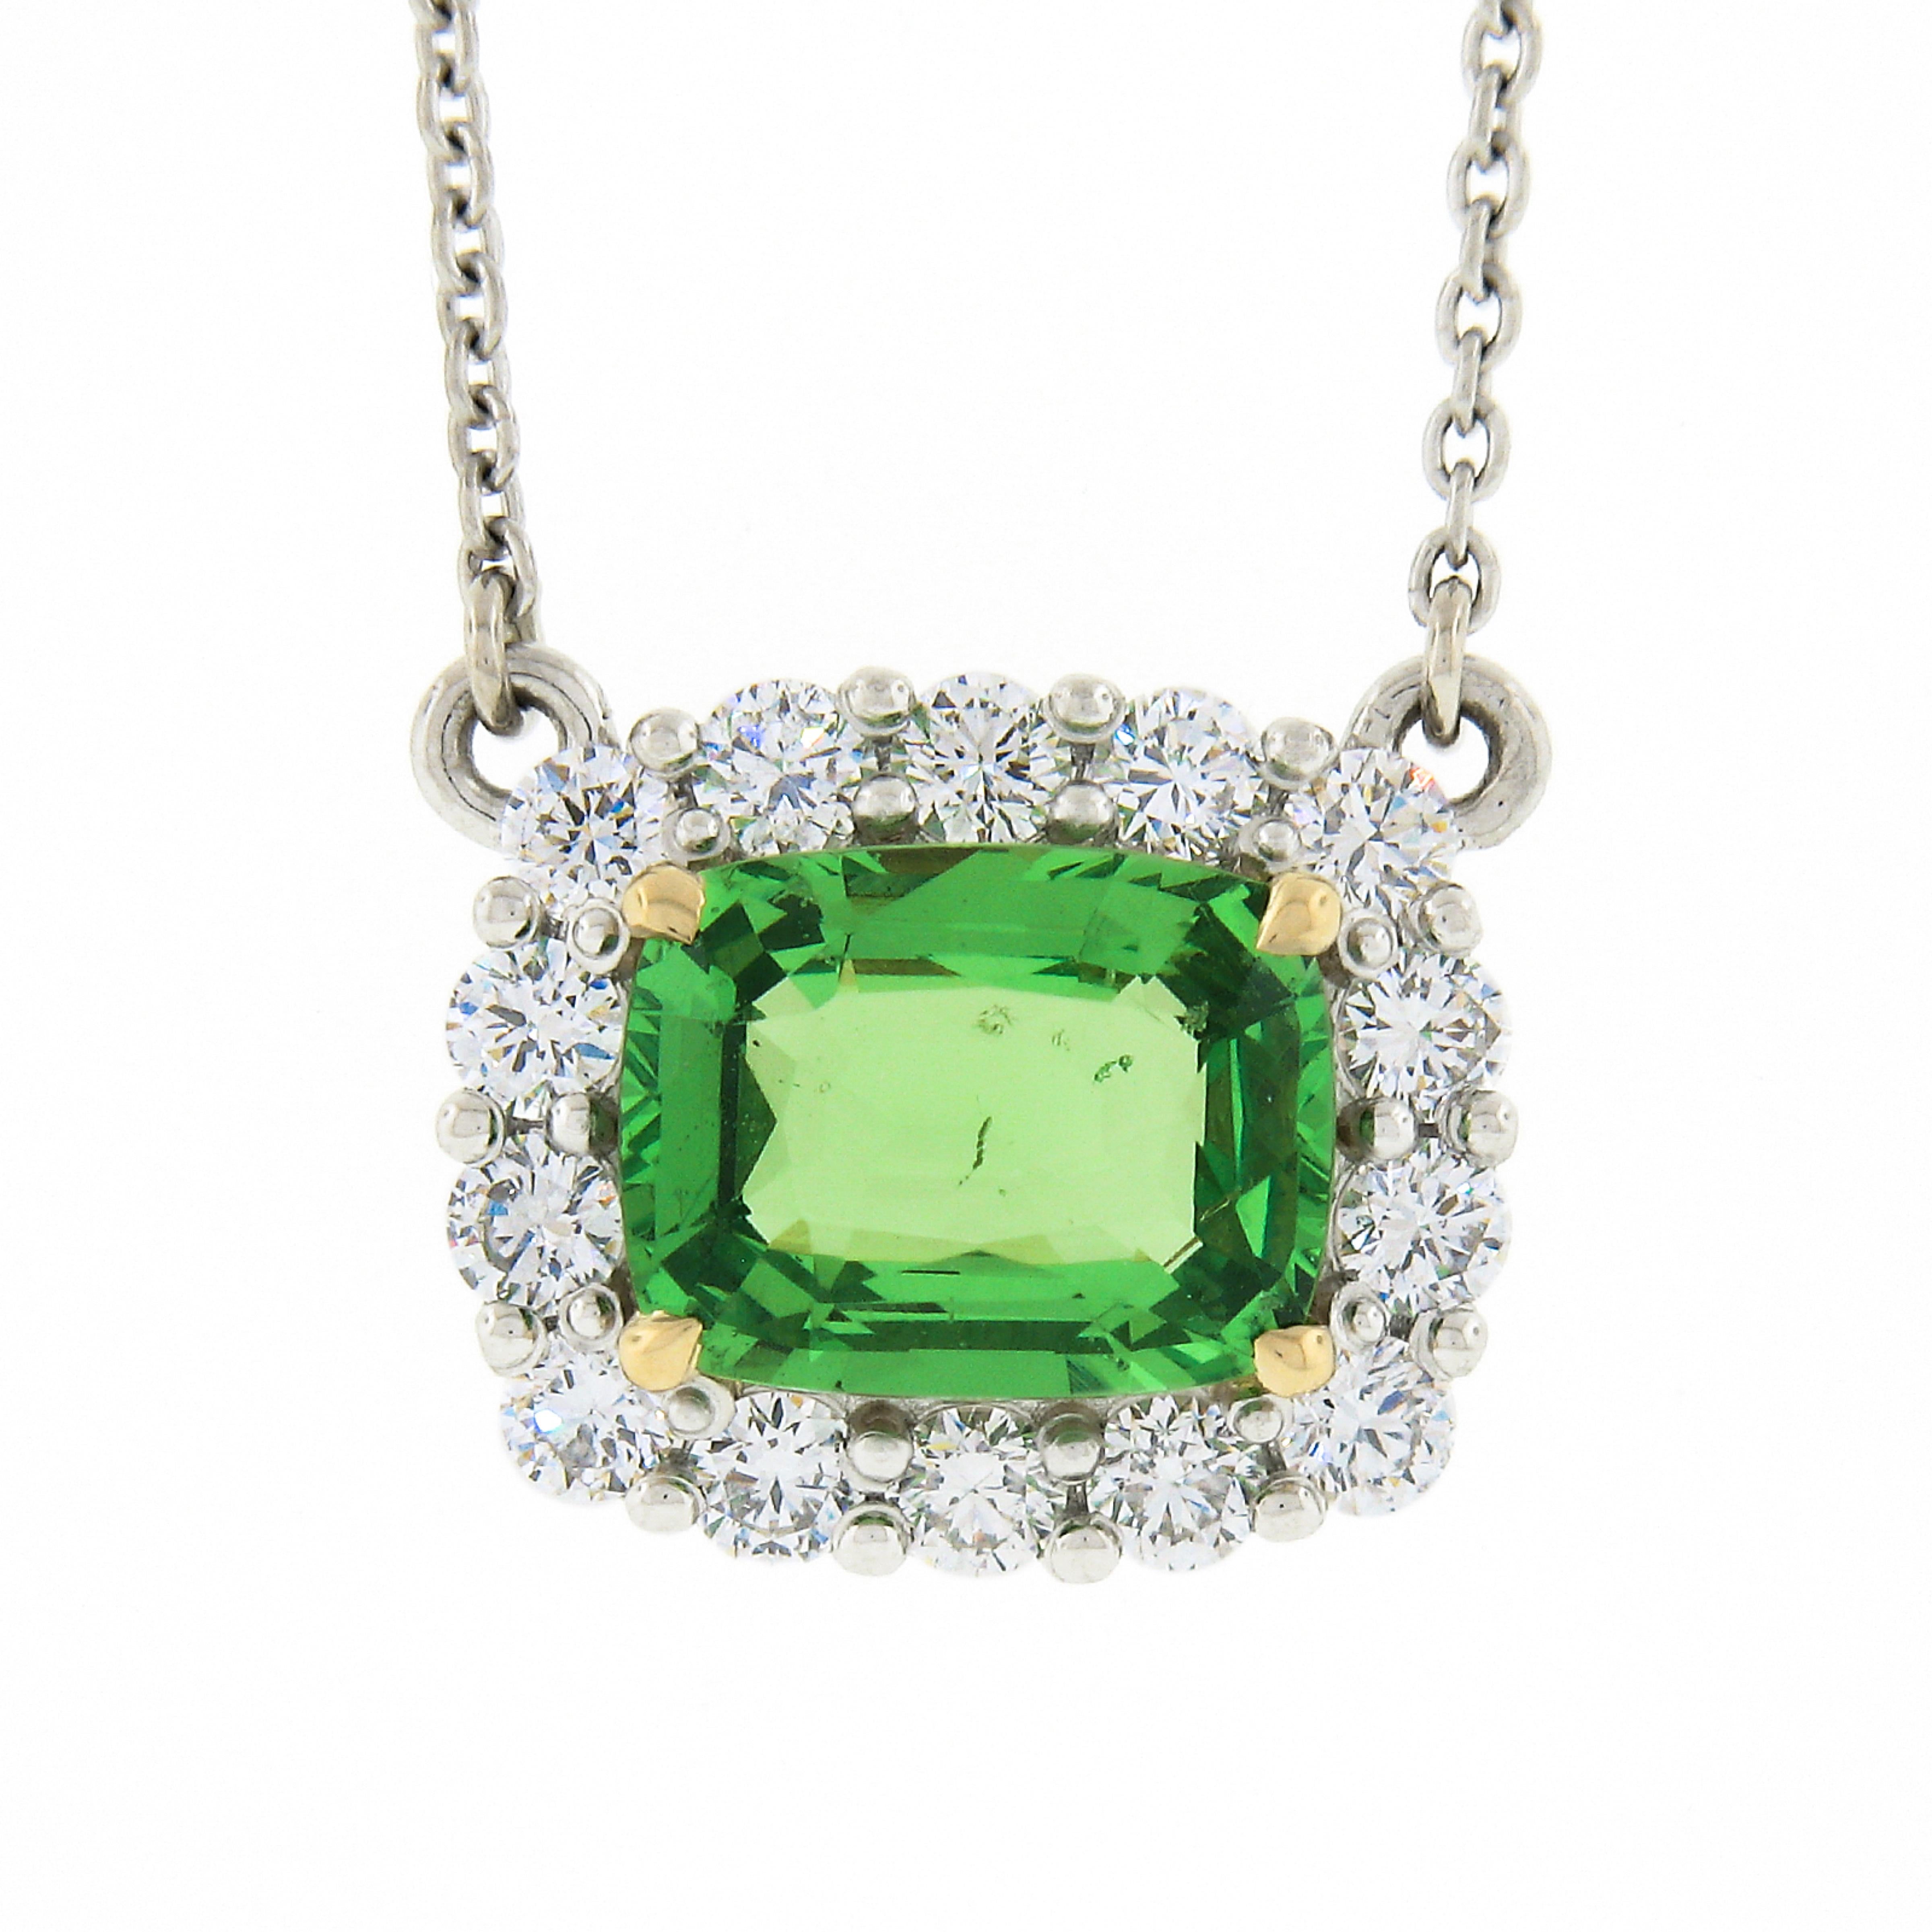 Here we have an absolutely gorgeous and very well made pendant necklace that is newly crafted from .950 platinum with a solid 18k yellow gold center basket that carries a stunning, GIA certified, natural tsavorite solitaire stone surrounded by a